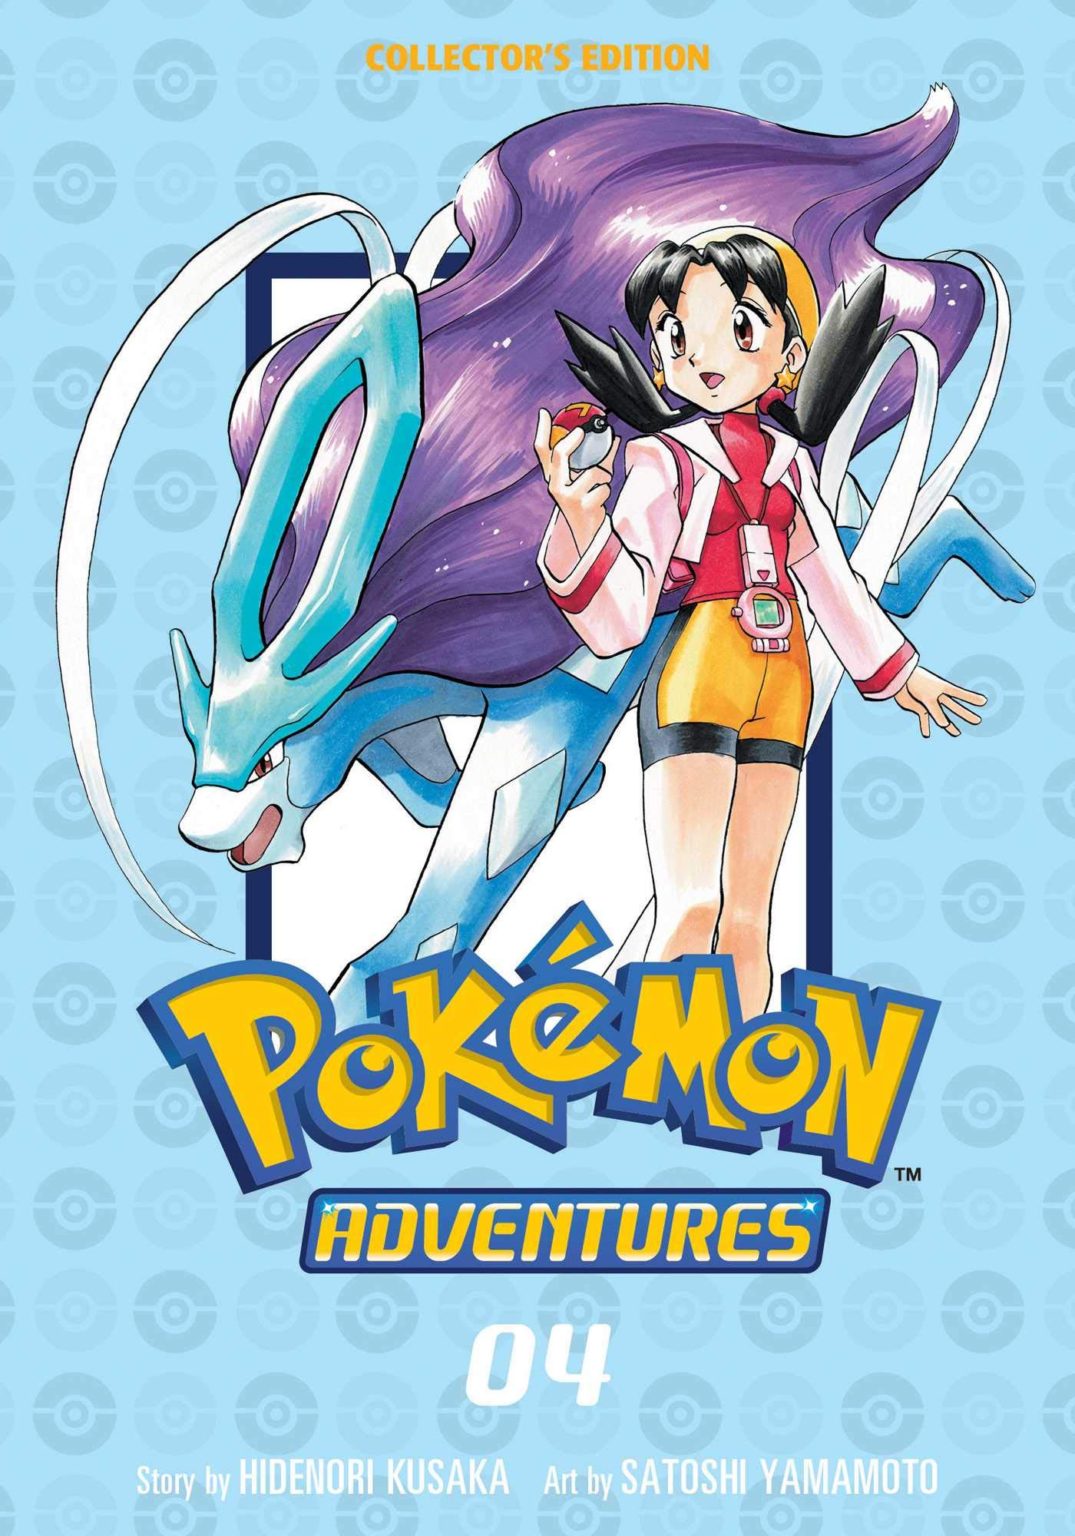 Pokemon Adventures Manga (What It Is and How to Obtain It